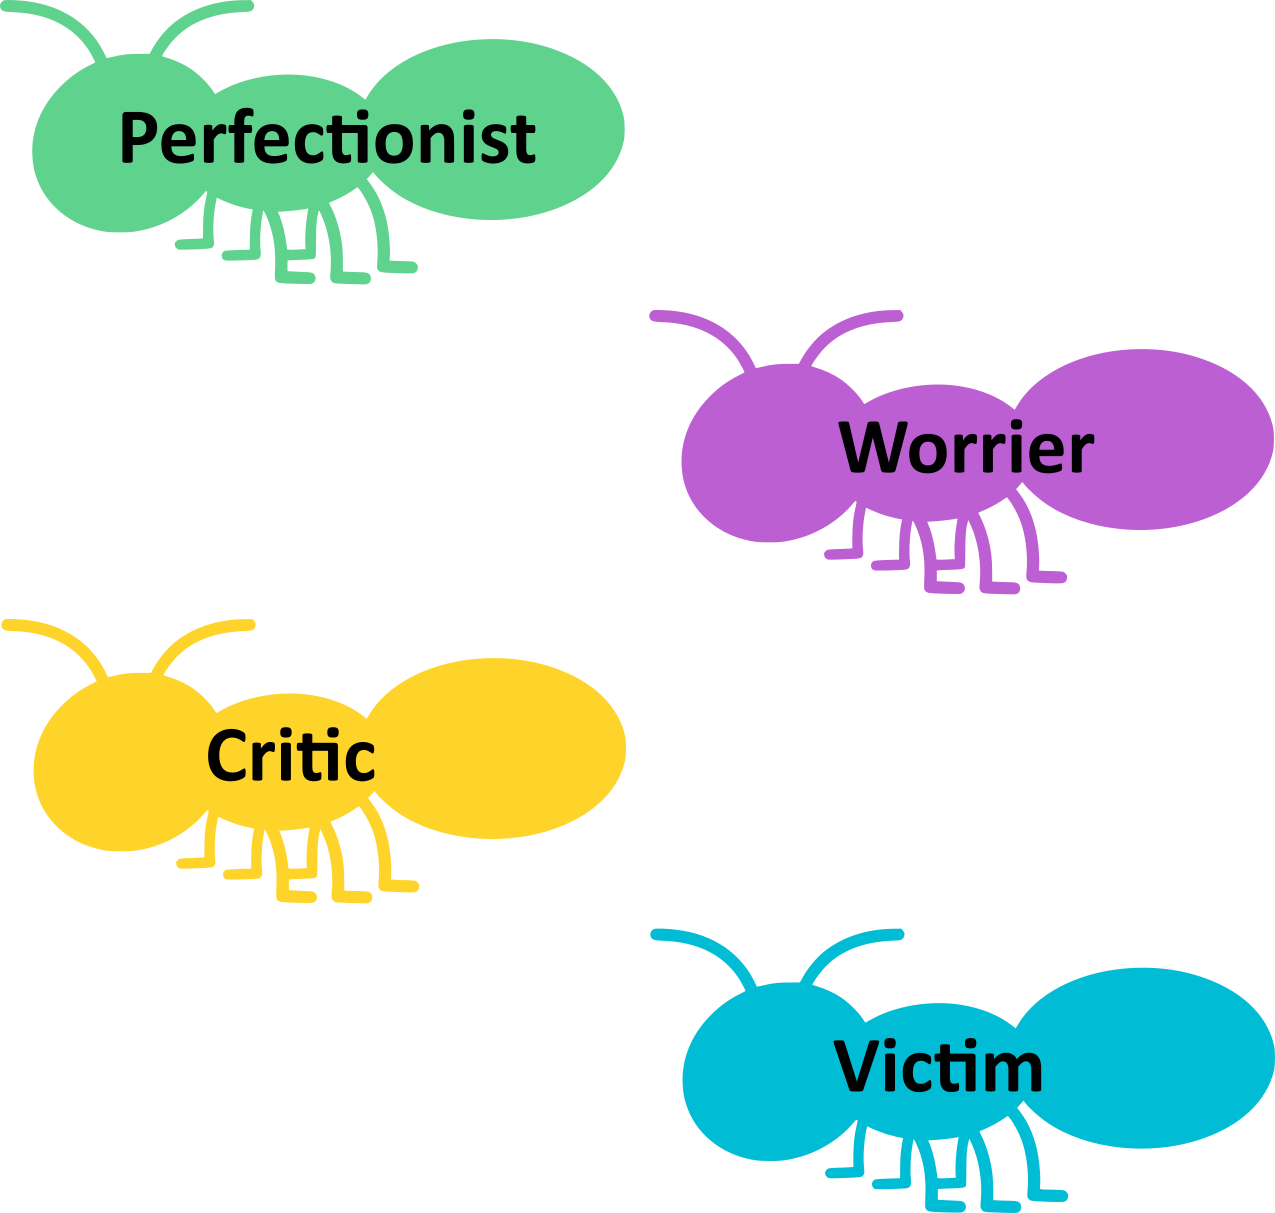 The four main types of Automatic Negative Thoughts: Perfectionist, Worrier, Critic, Victim